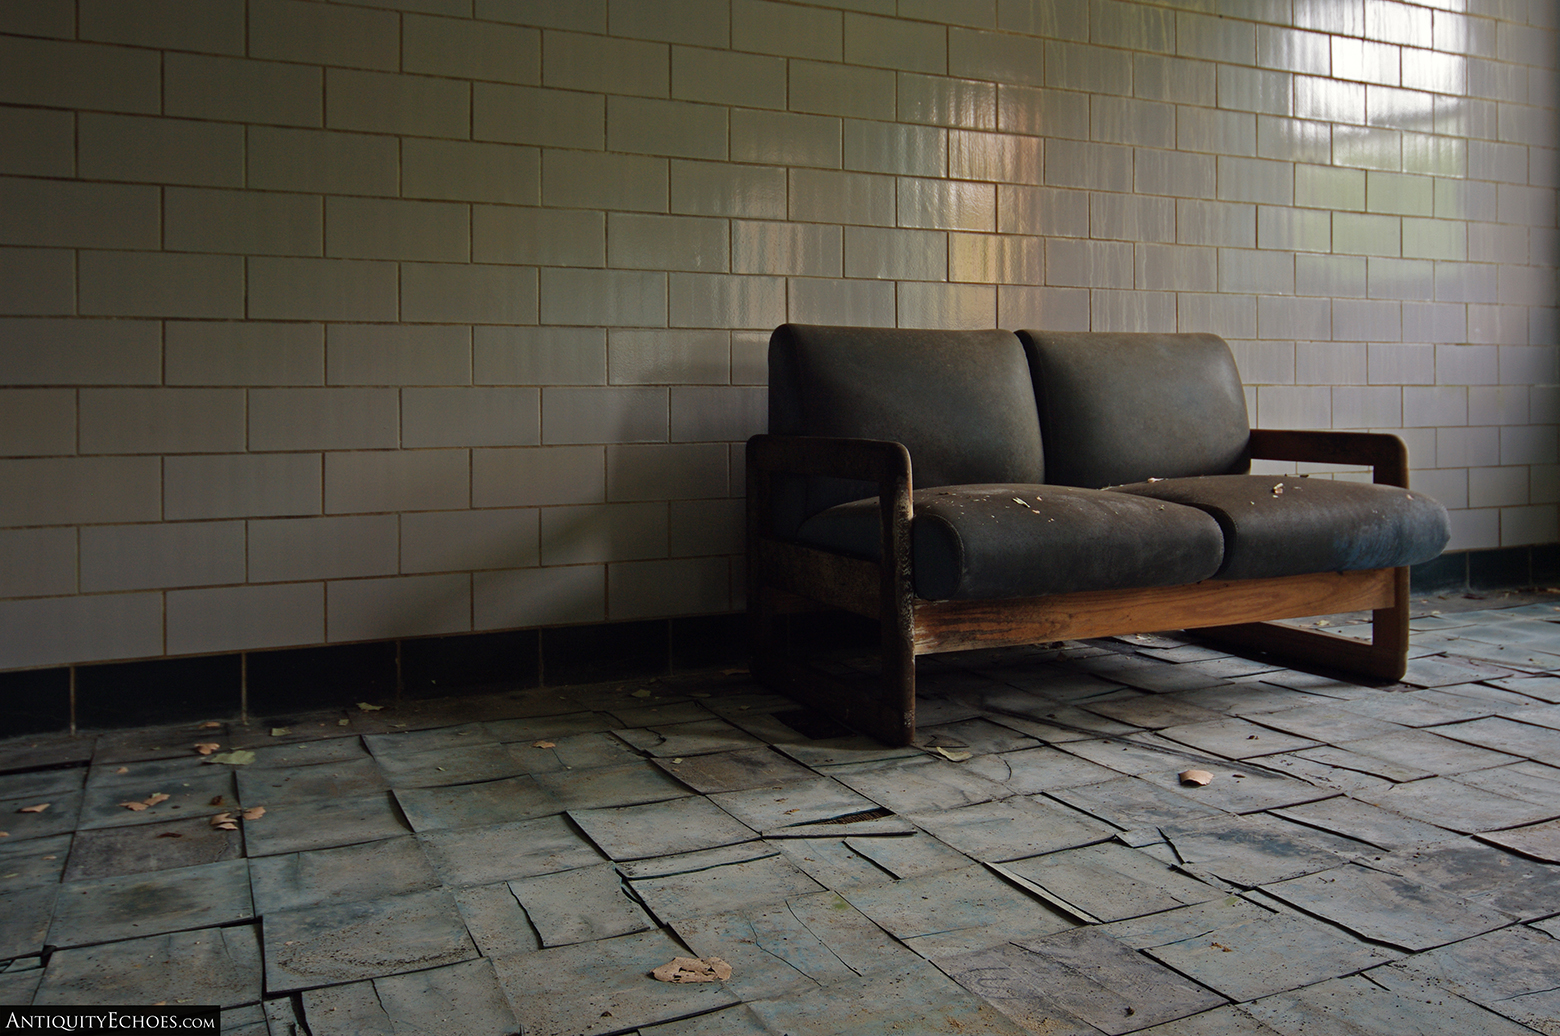 Embreeville State Hospital - A vinyl couch rots